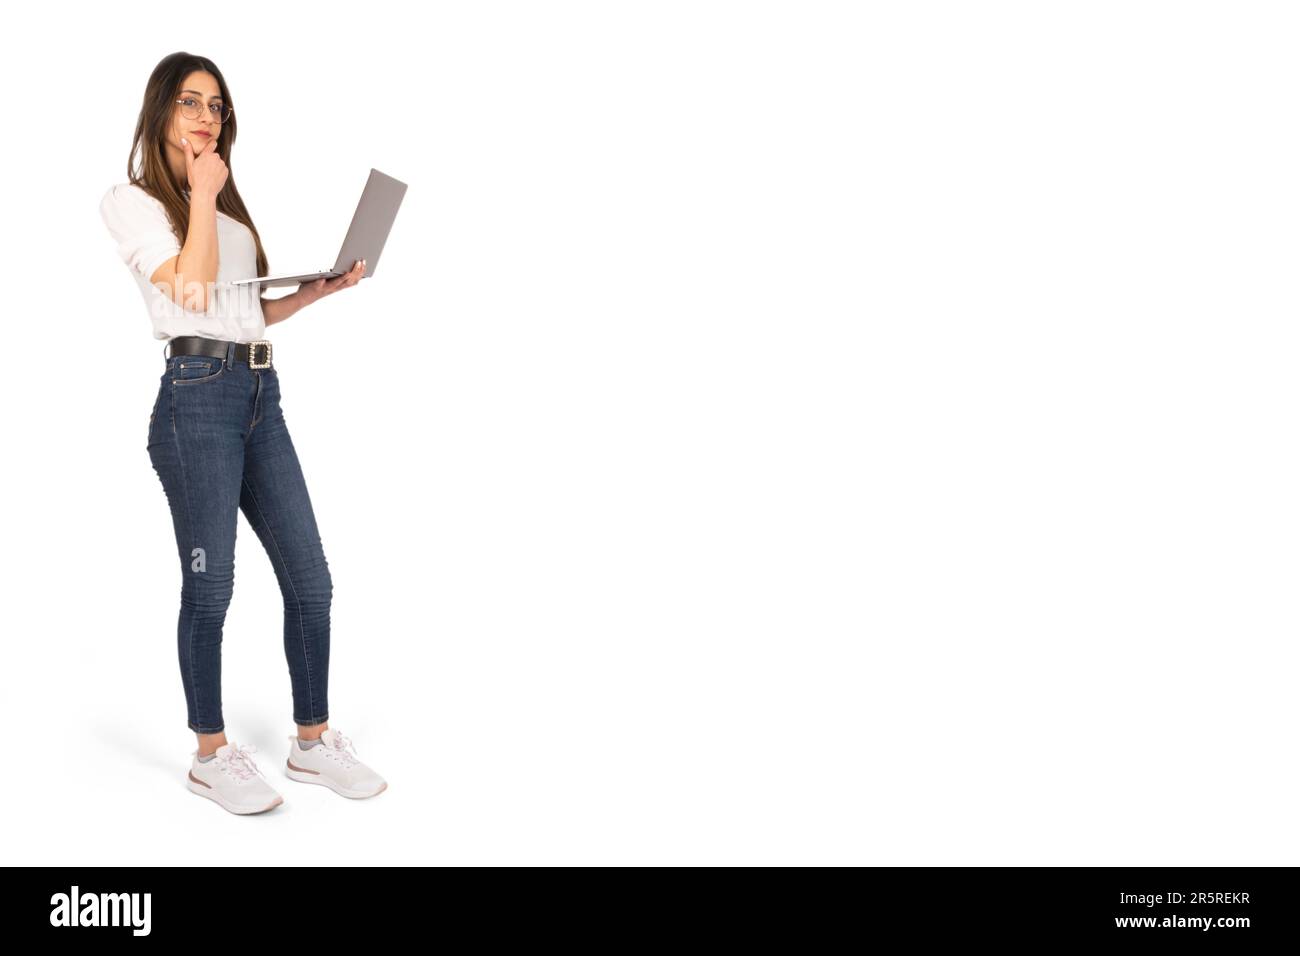 Full body view young business woman stand over isolated white studio background. Holding laptop. Thinking, thoughtful office worker hand off chin. Stock Photo